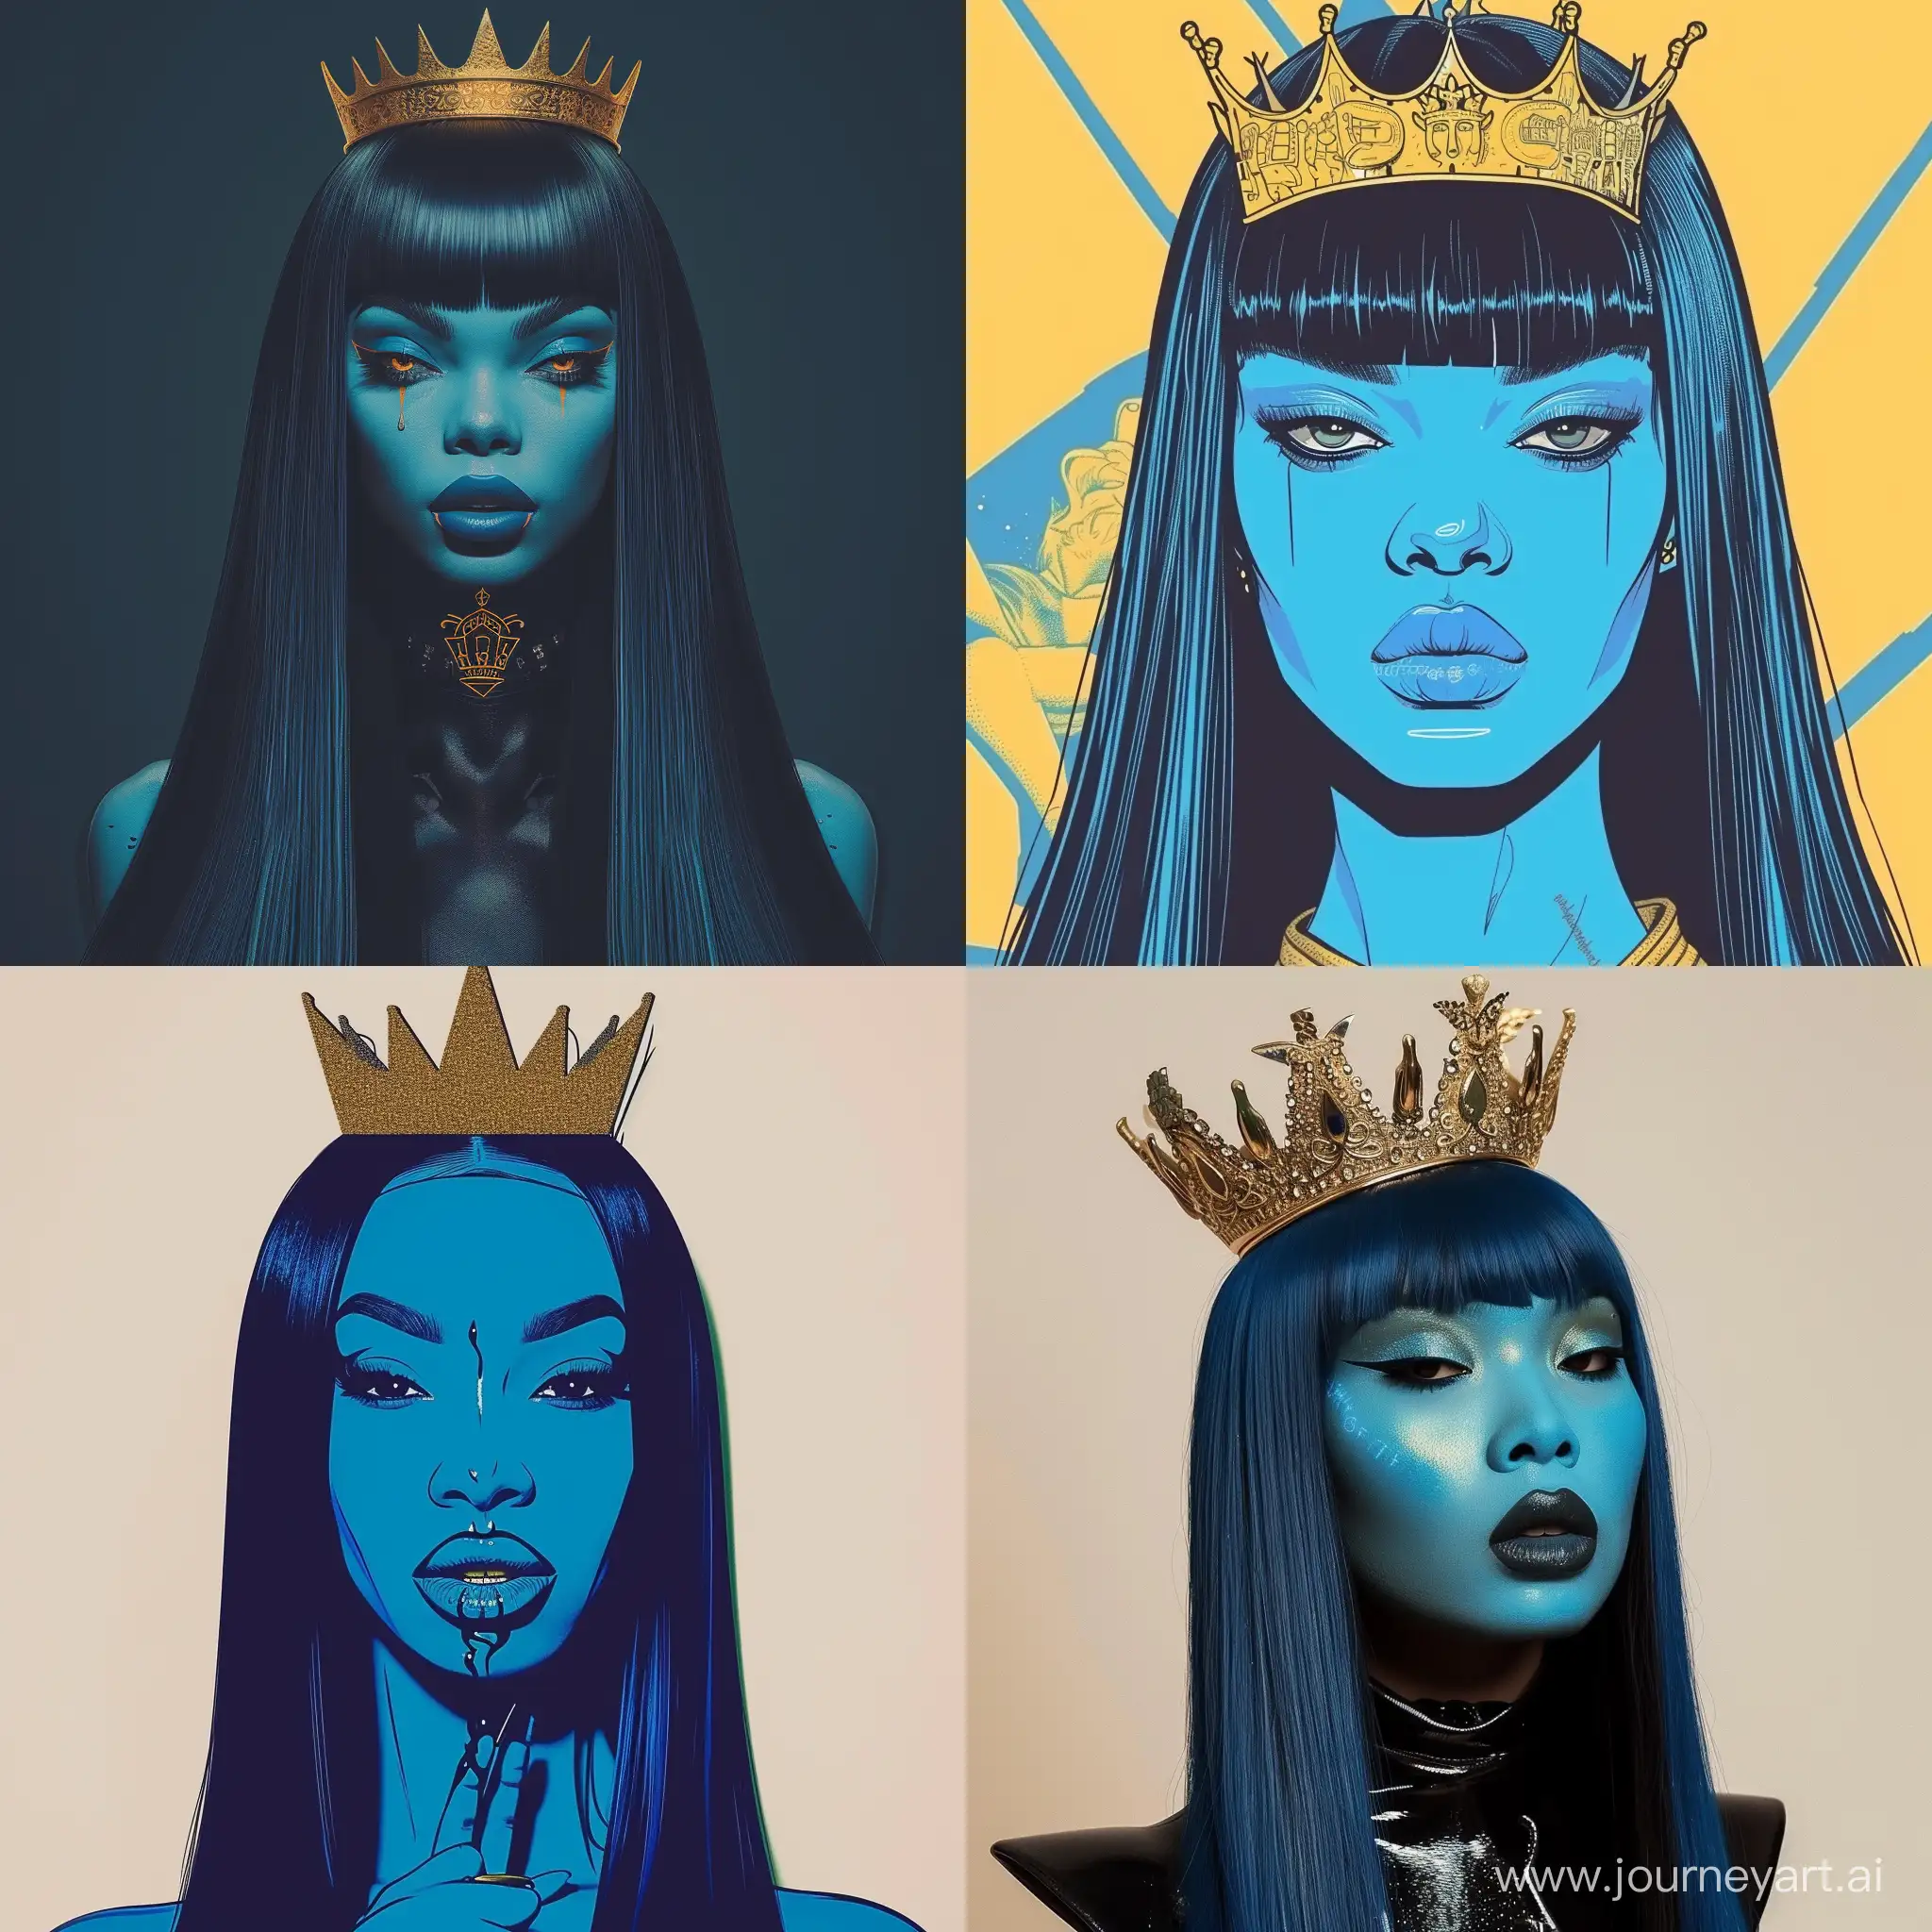 Royal-Portrait-of-a-BlueSkinned-Monarch-with-Straight-Black-Hair-and-Crown